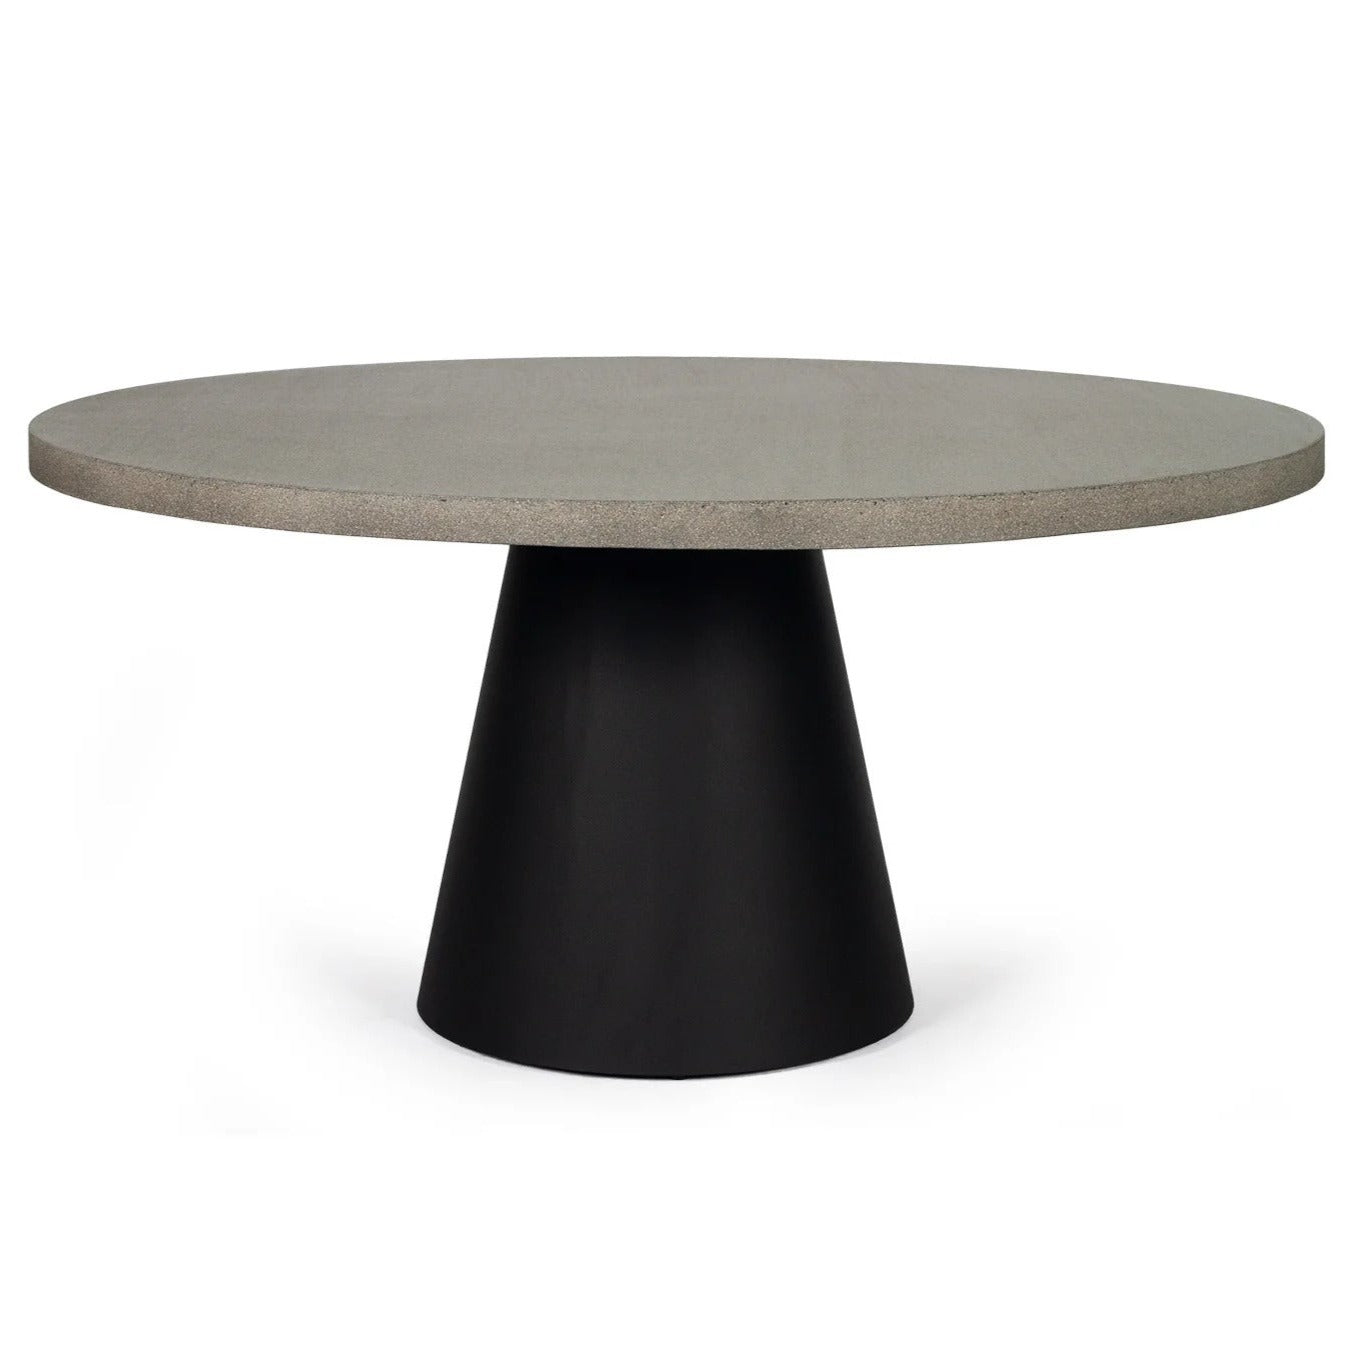 Avalon Round Dining Table (Speckled Grey with Black Metal Cone Base).